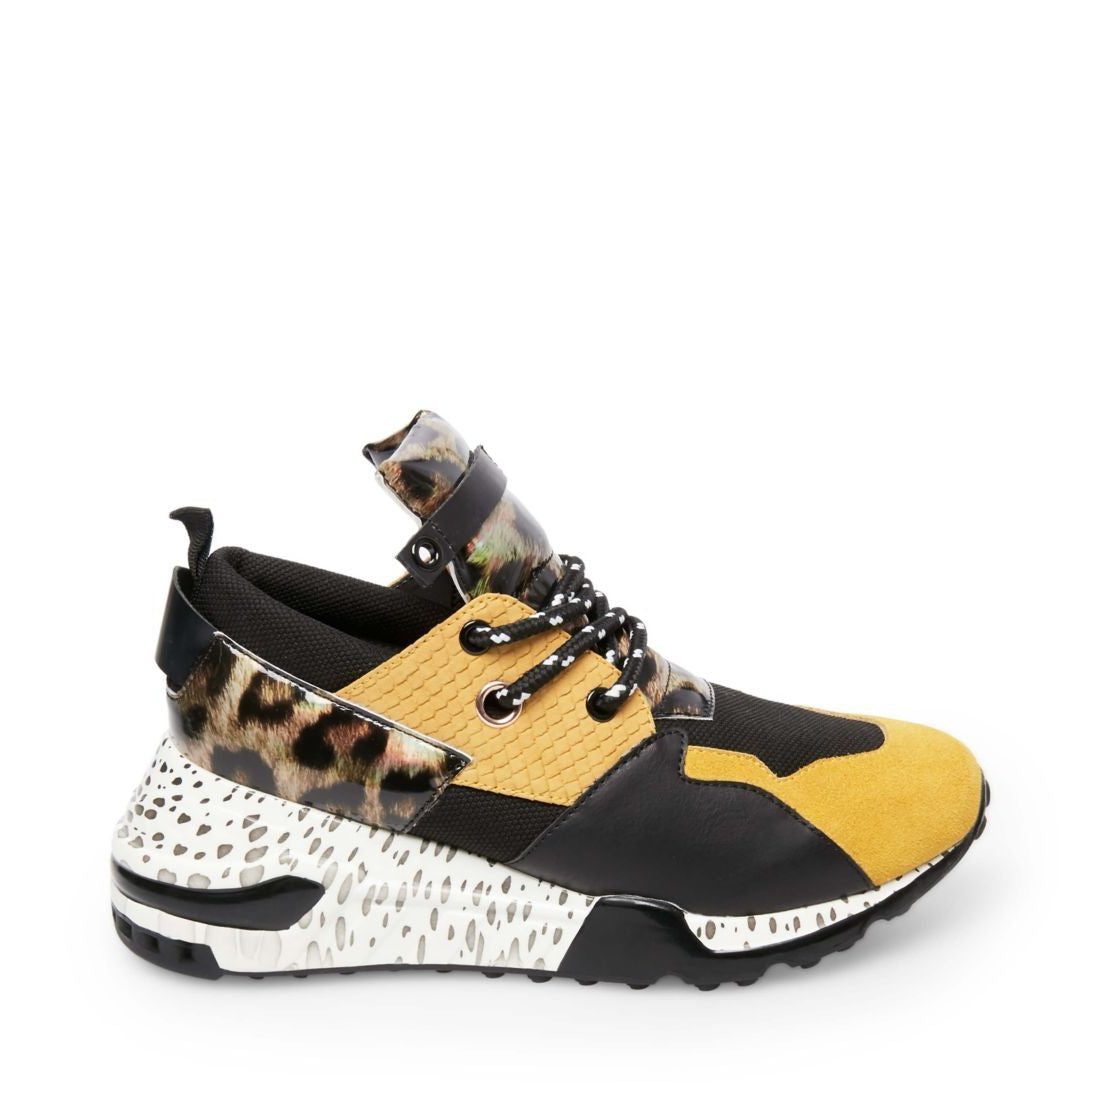 steve madden cliff sneakers yellow